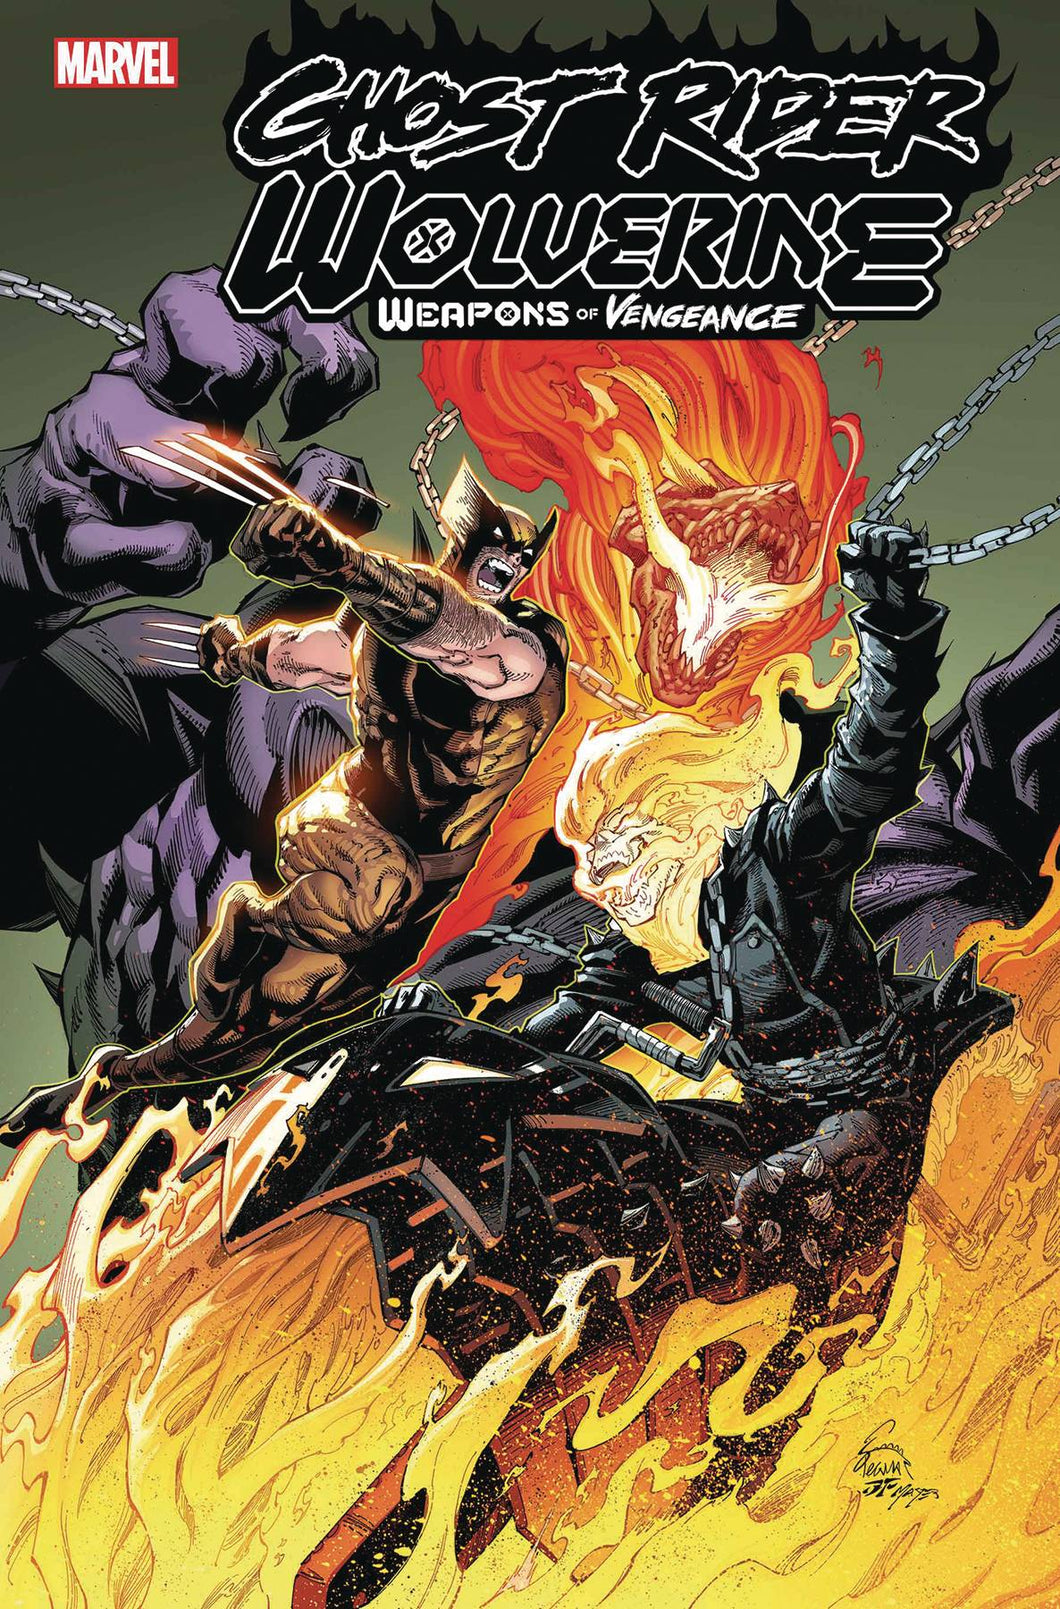 GHOST RIDER WOLVERINE WEAPONS VENGEANCE OMEGA #1